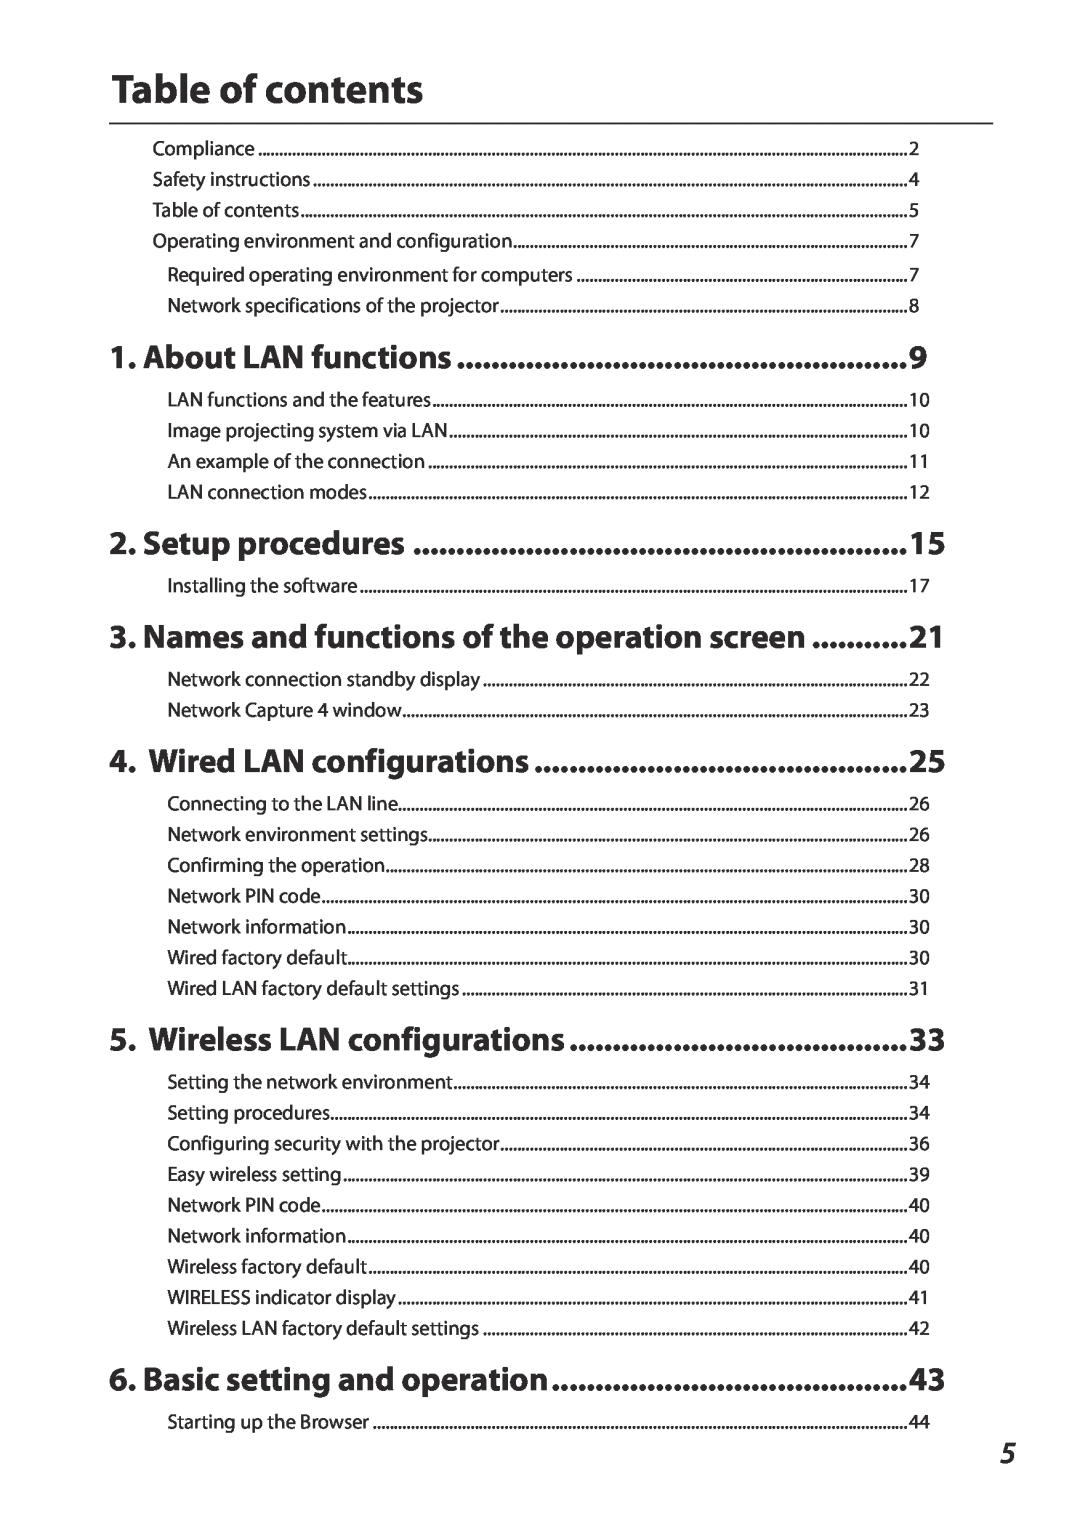 Eiki QXXAVC922---P Table of contents, About LAN functions, Setup procedures, Names and functions of the operation screen 